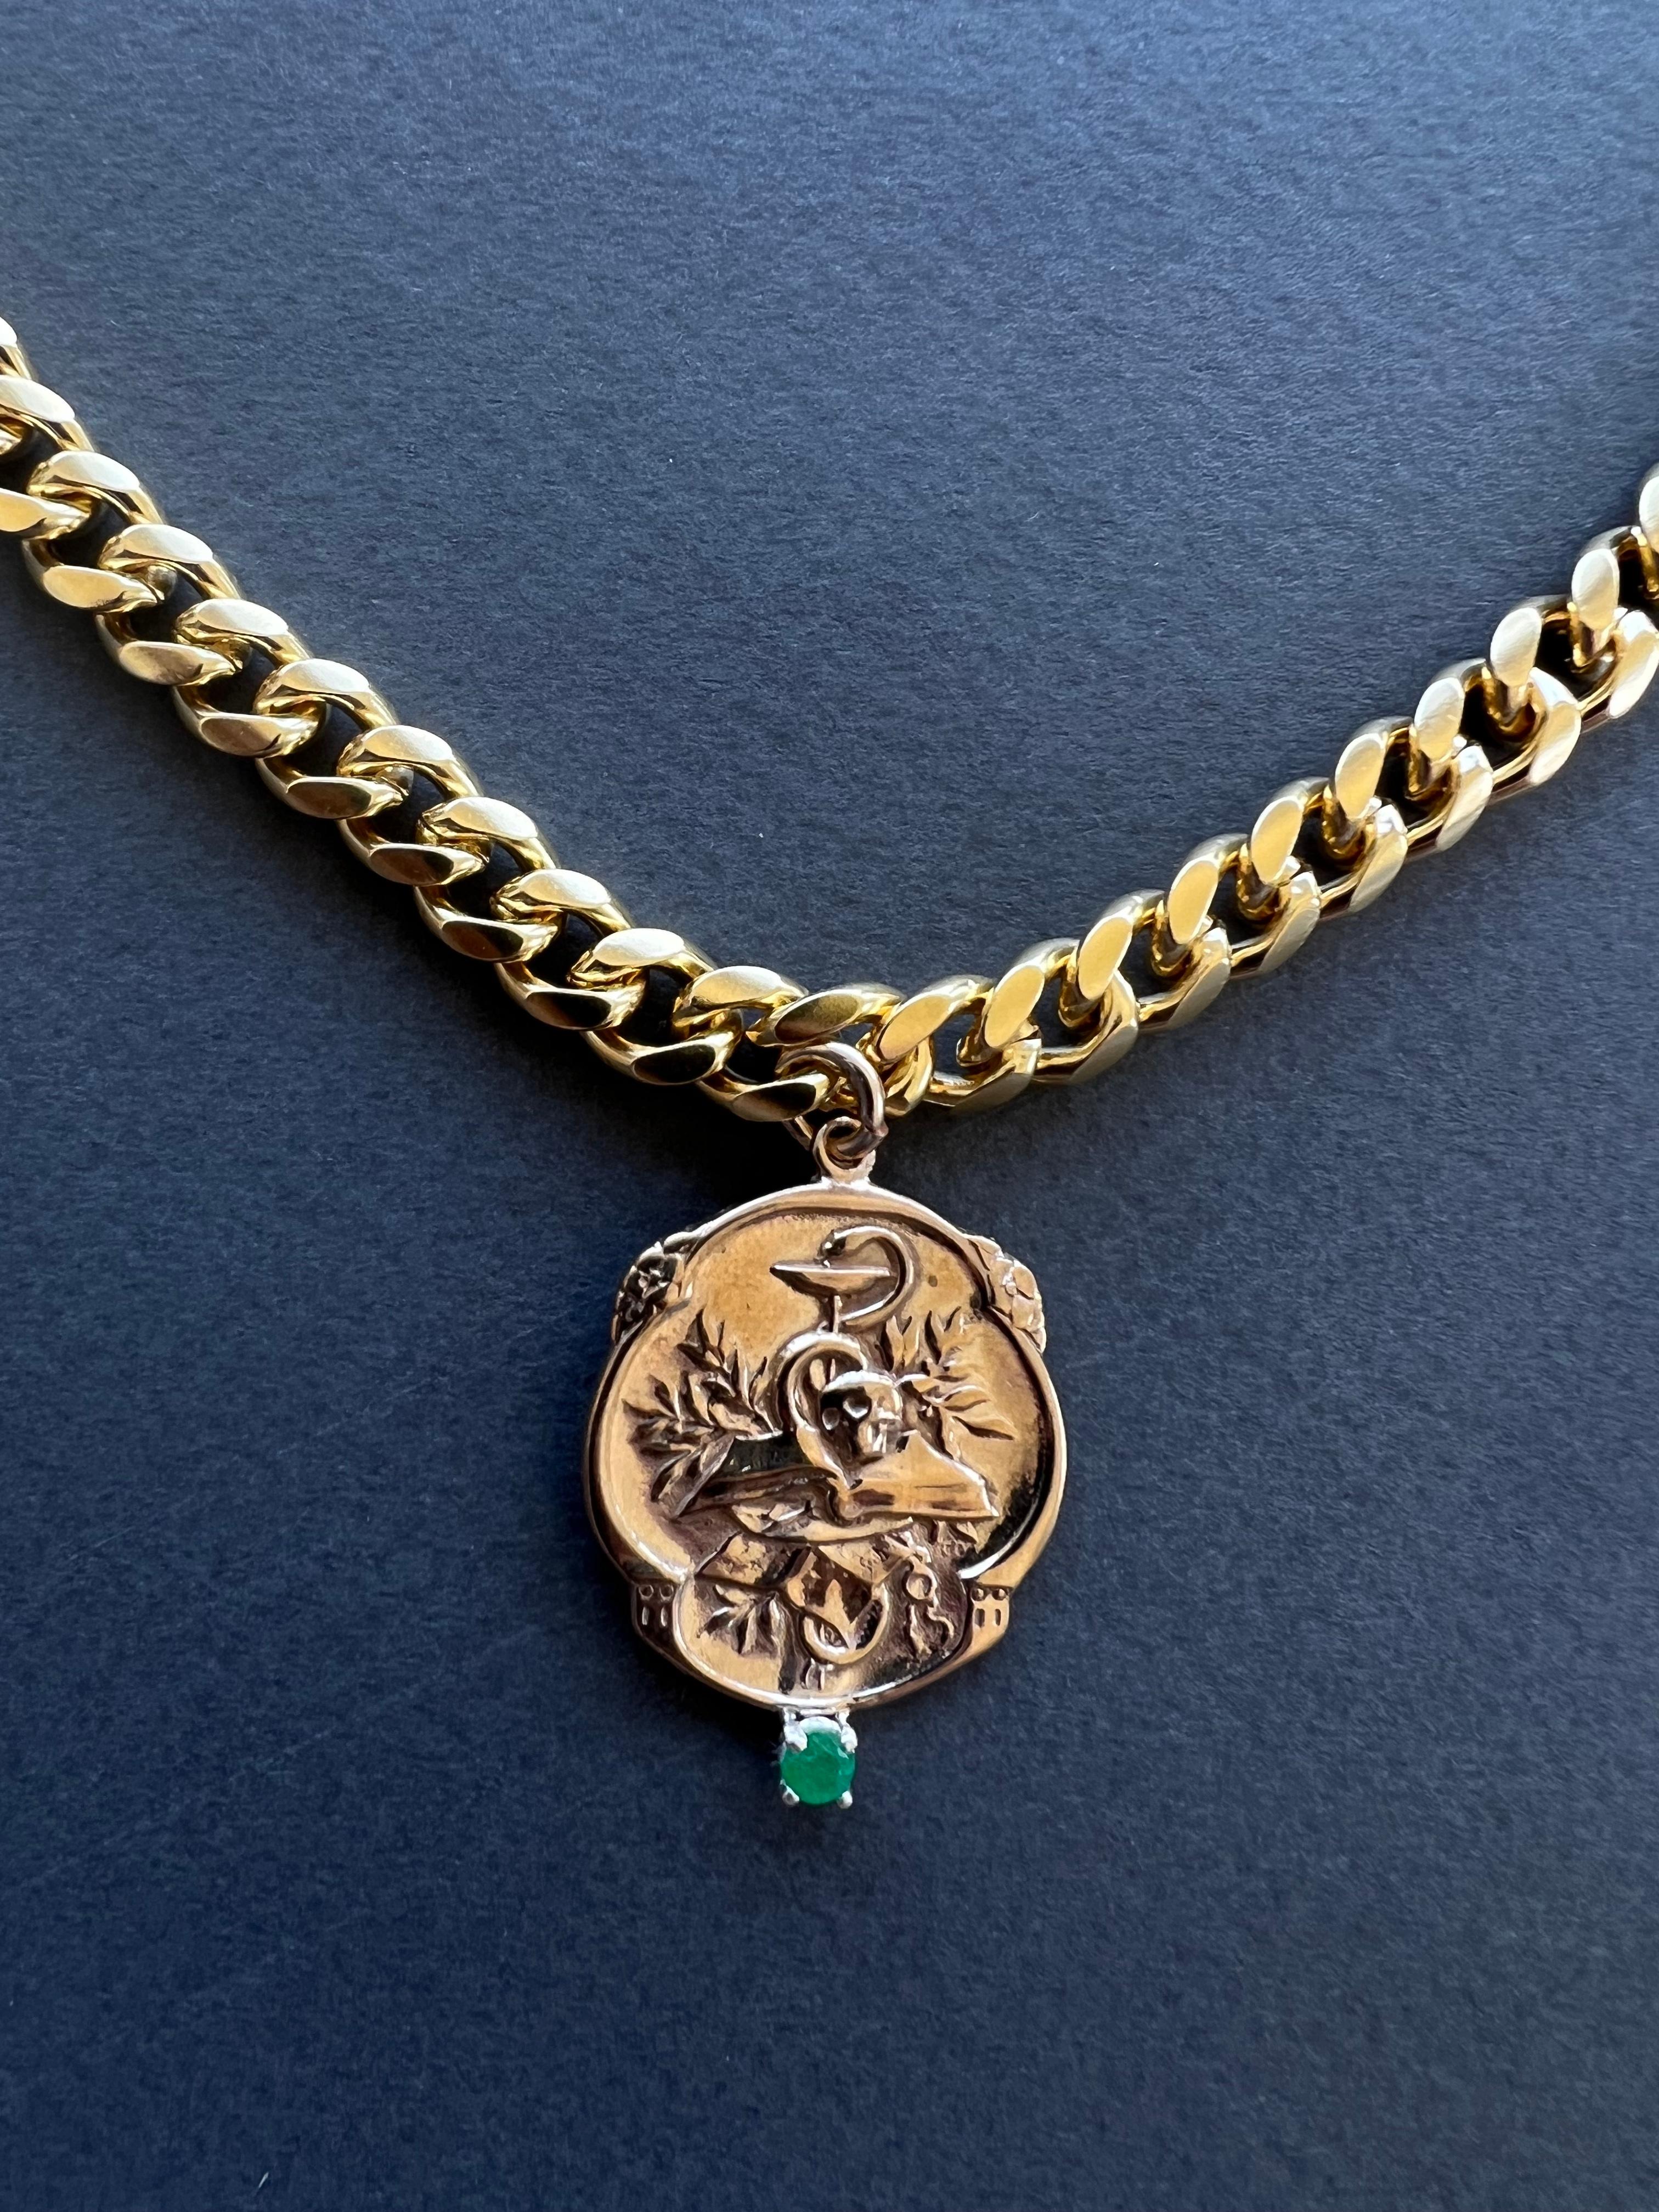 Emerald Victorian Style Memento Mori Medal Choker Chain Necklace Skull J Dauphin
Gold Plated Brass Chain and Bronze Medal

Symbols or medals can become a powerful tool in our arsenal for the spiritual. 
Since ancient times spiritual pendants,